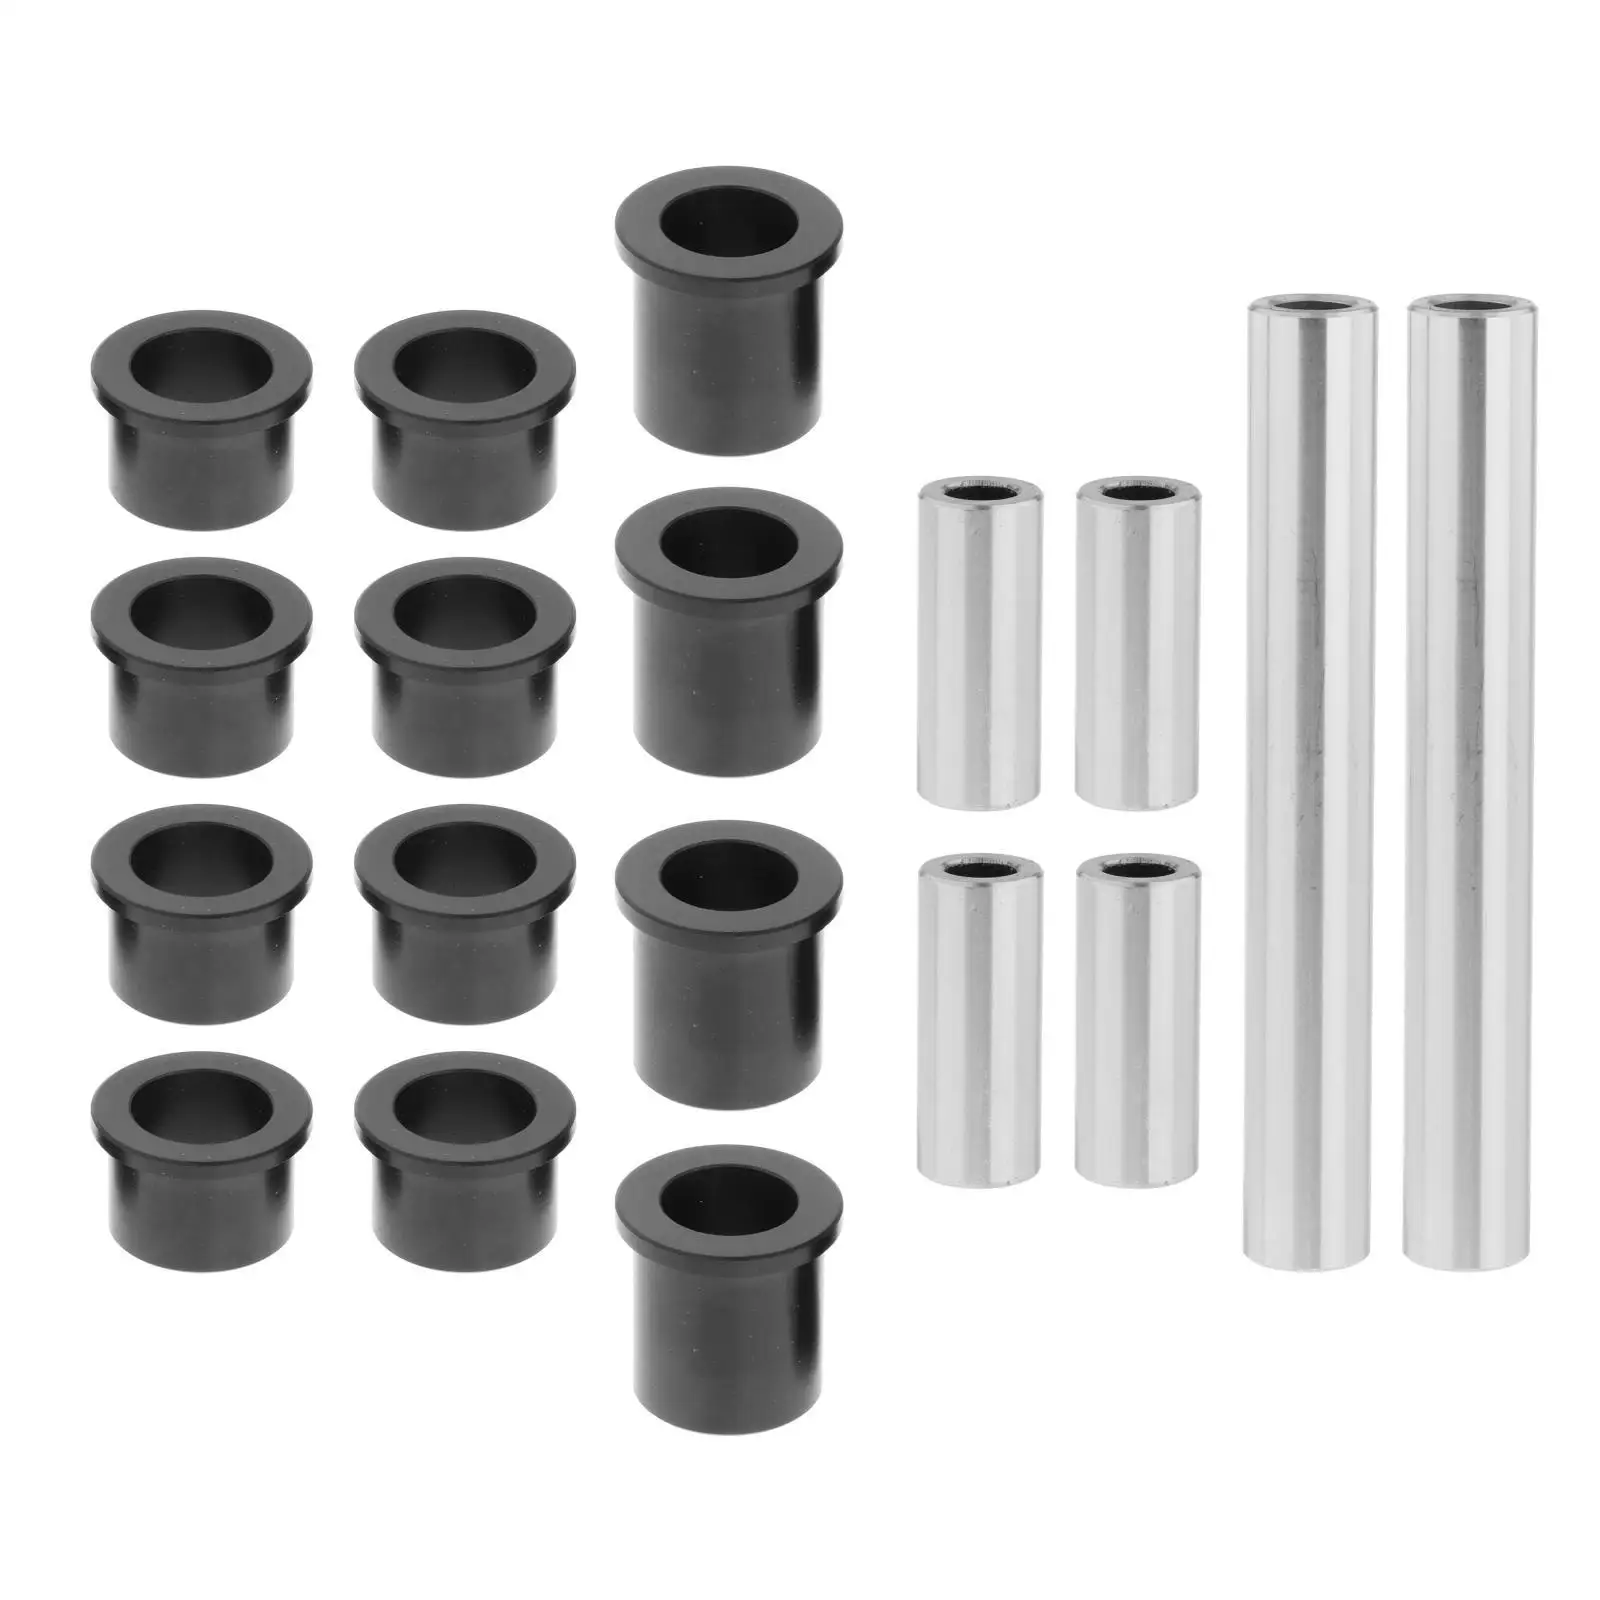 A-Arm Bushing Set for Kawasaki 650i 750i Replacement Durable Premium Easy to Install